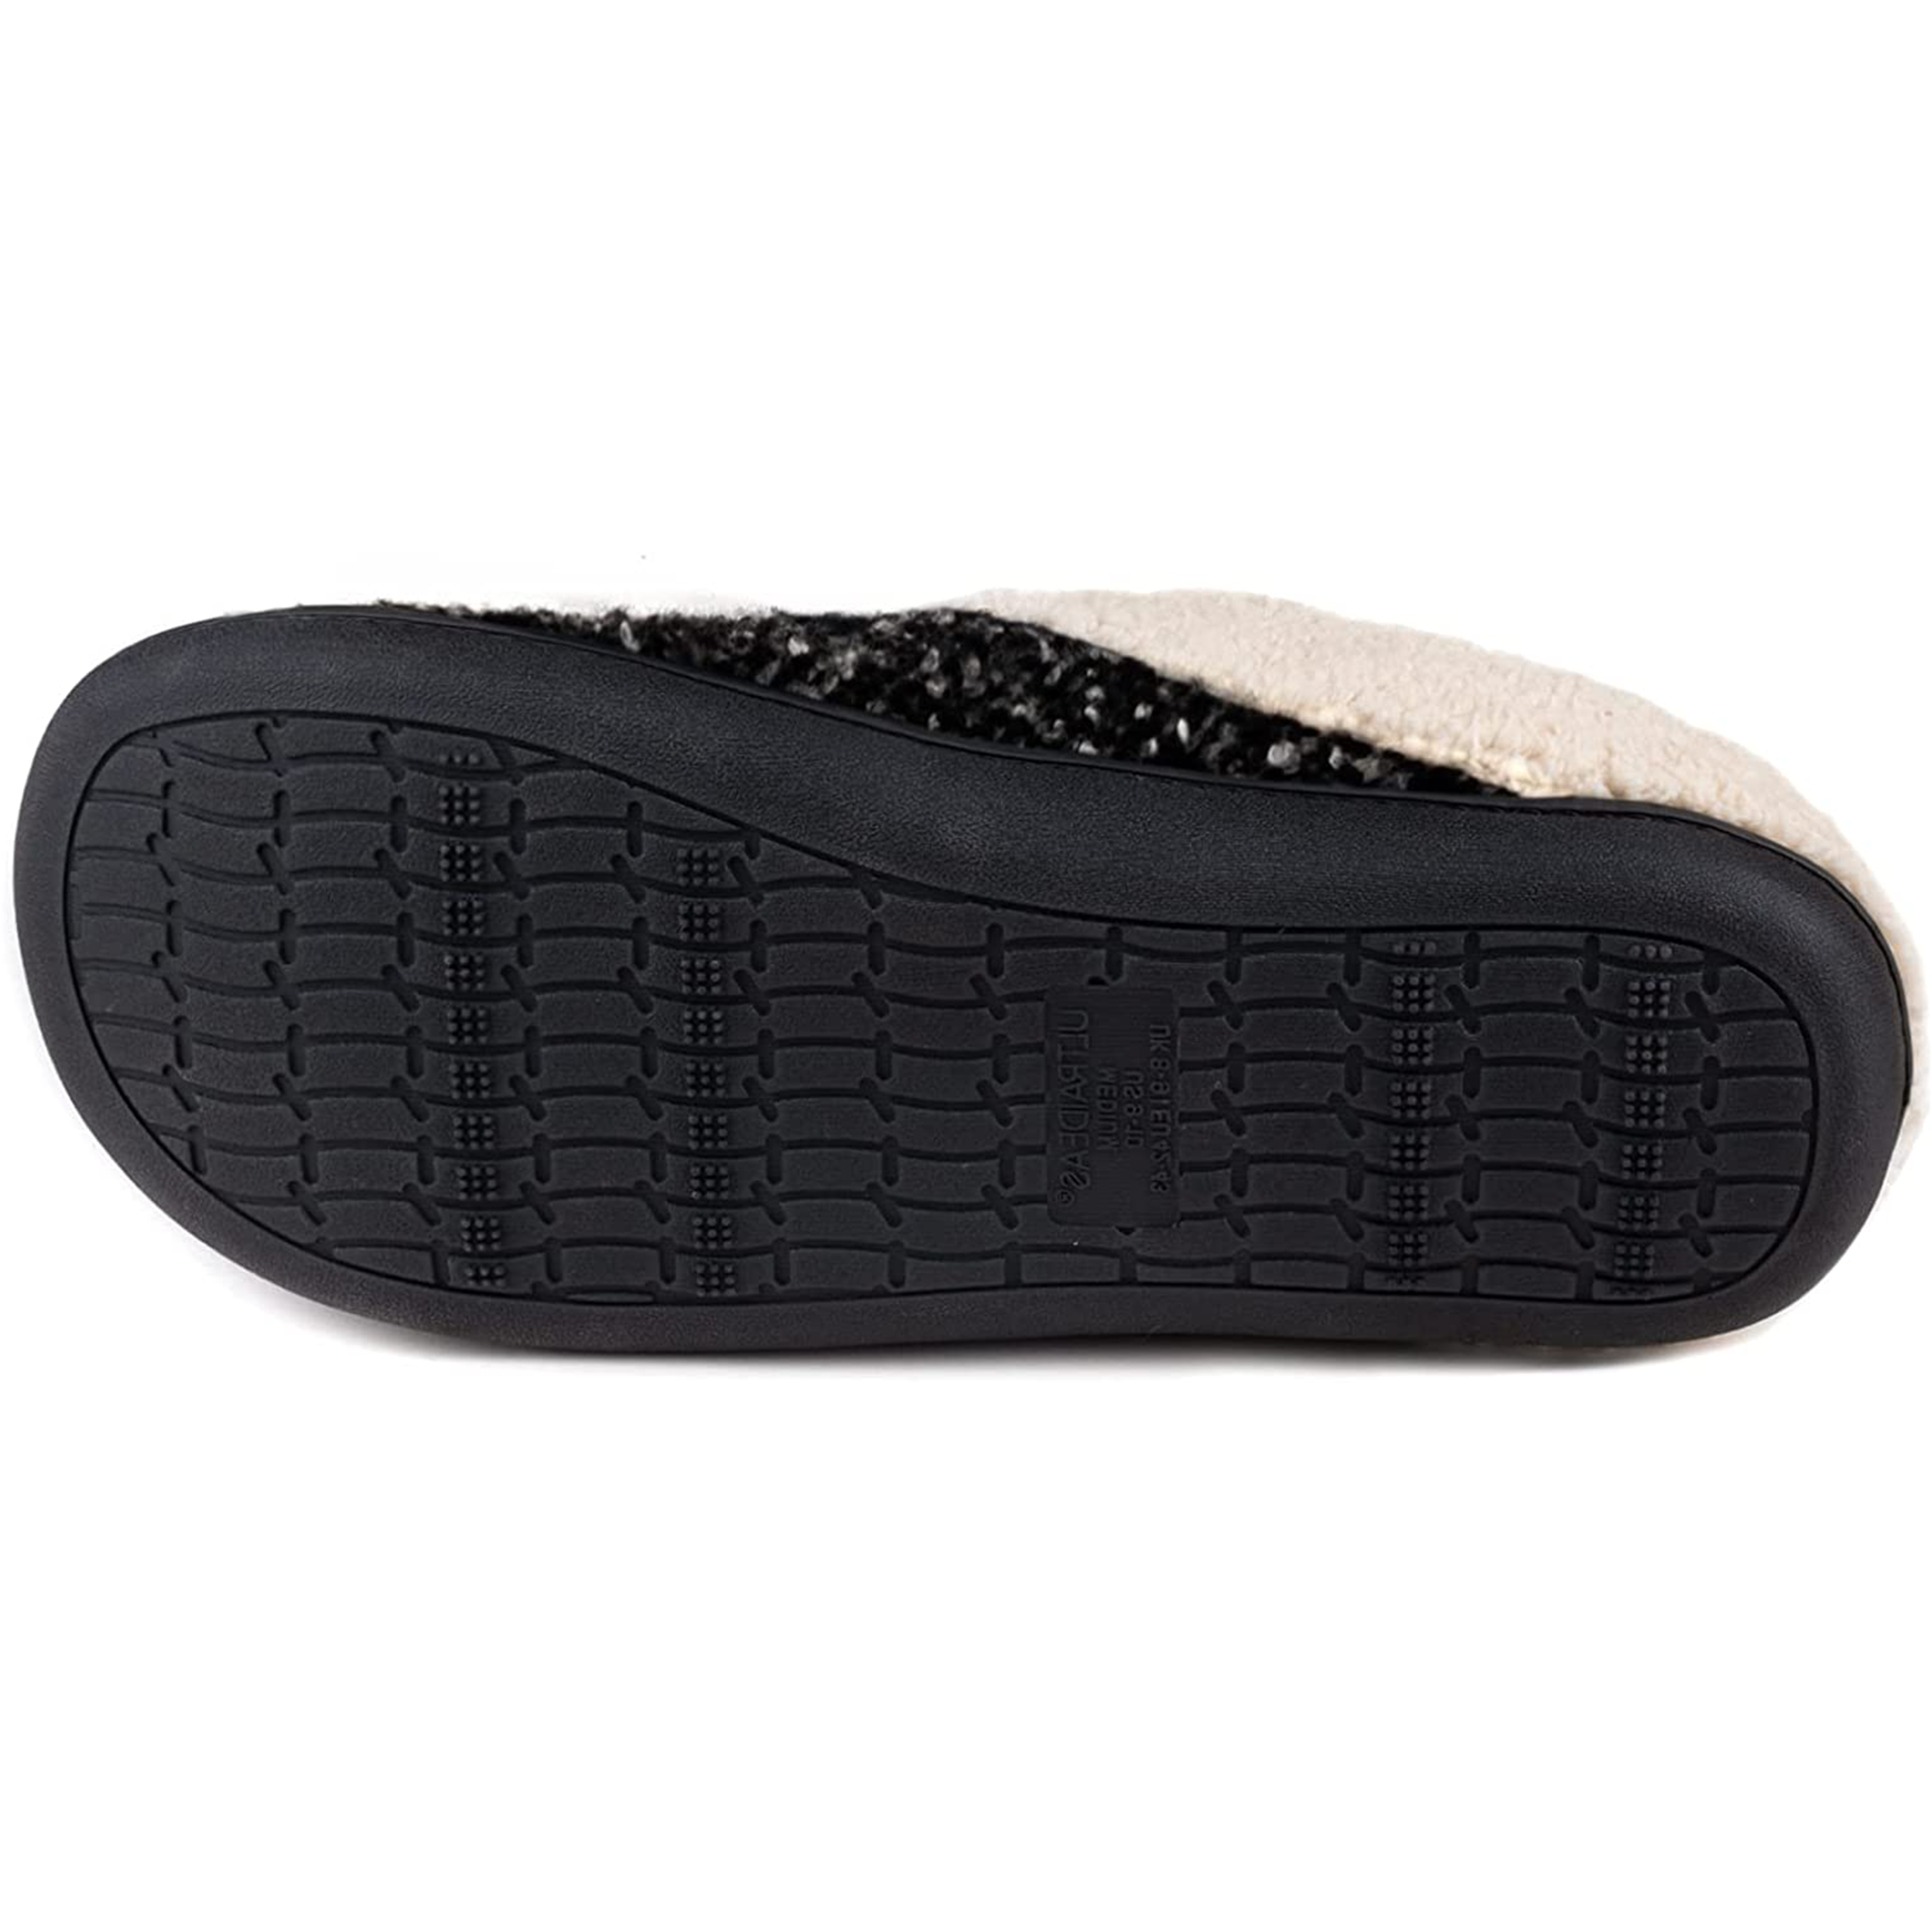 Men's Cozy Memory Foam Slippers with Fuzzy Plush Wool-Like Lining, Slip on Clog House Shoes with Indoor Outdoor Anti-Skid Rubber Sole - image 5 of 5